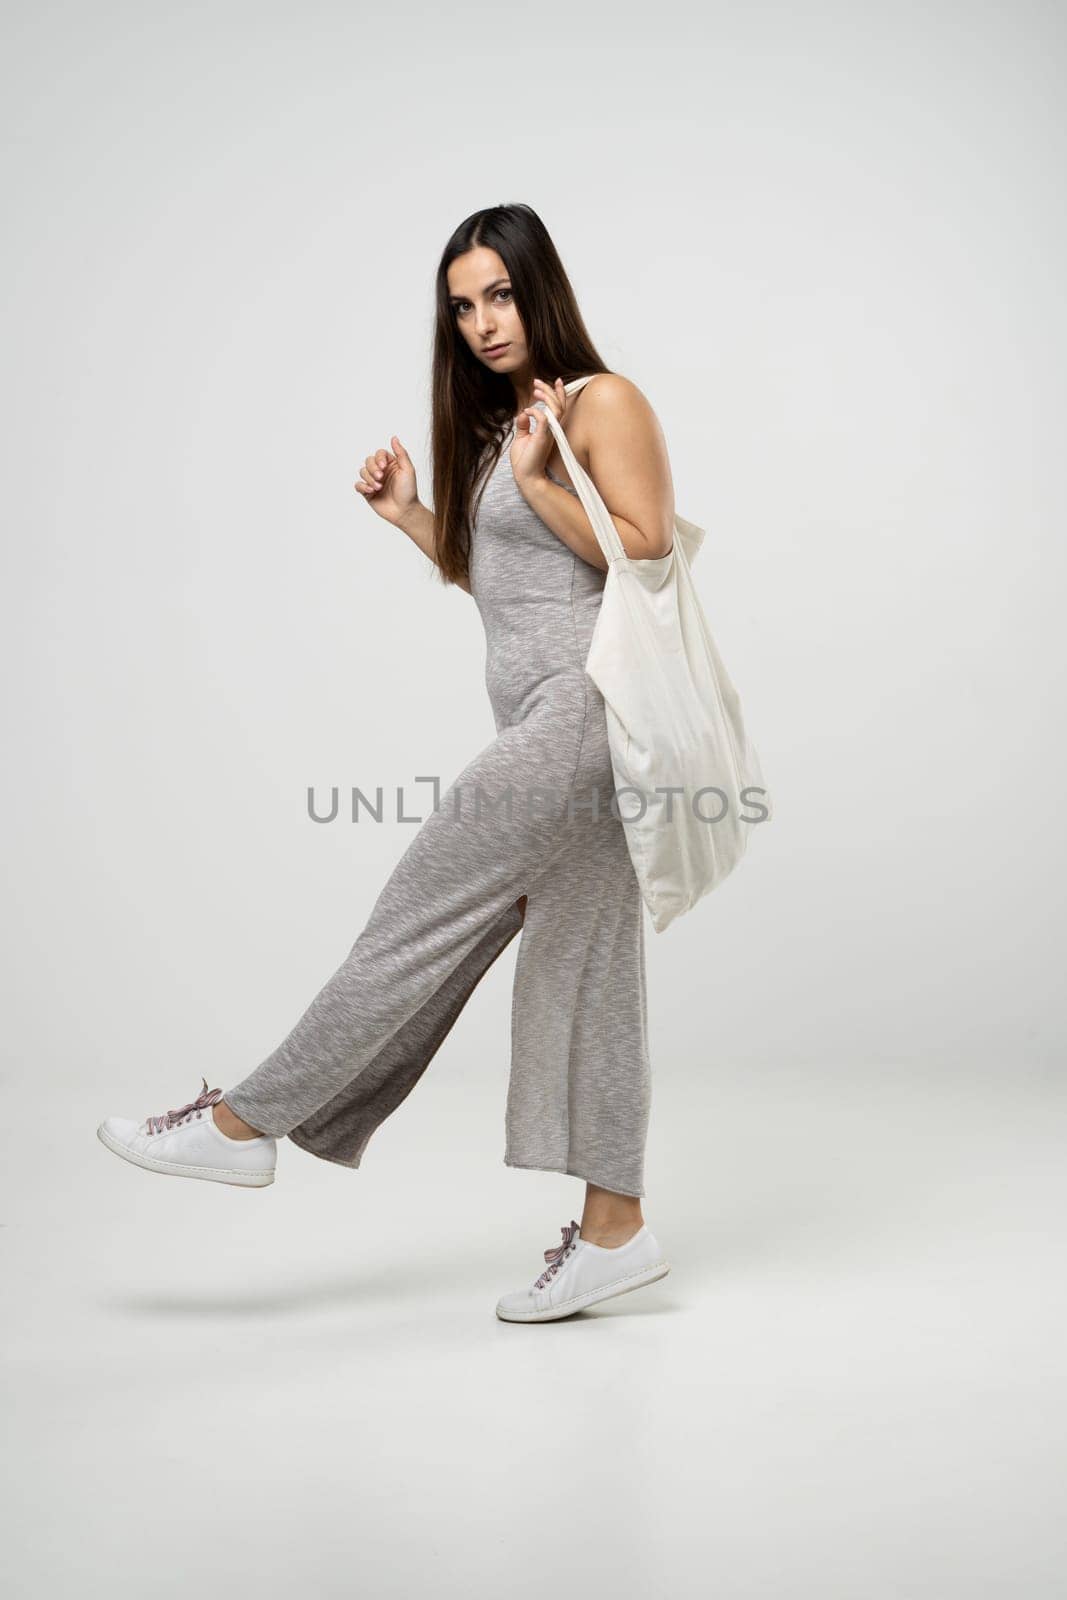 Brunette woman in grey dress holding cotton shopper bag with vegetables, products in white room. Eco friendly shopping bags. Zero waste, plastic free concept